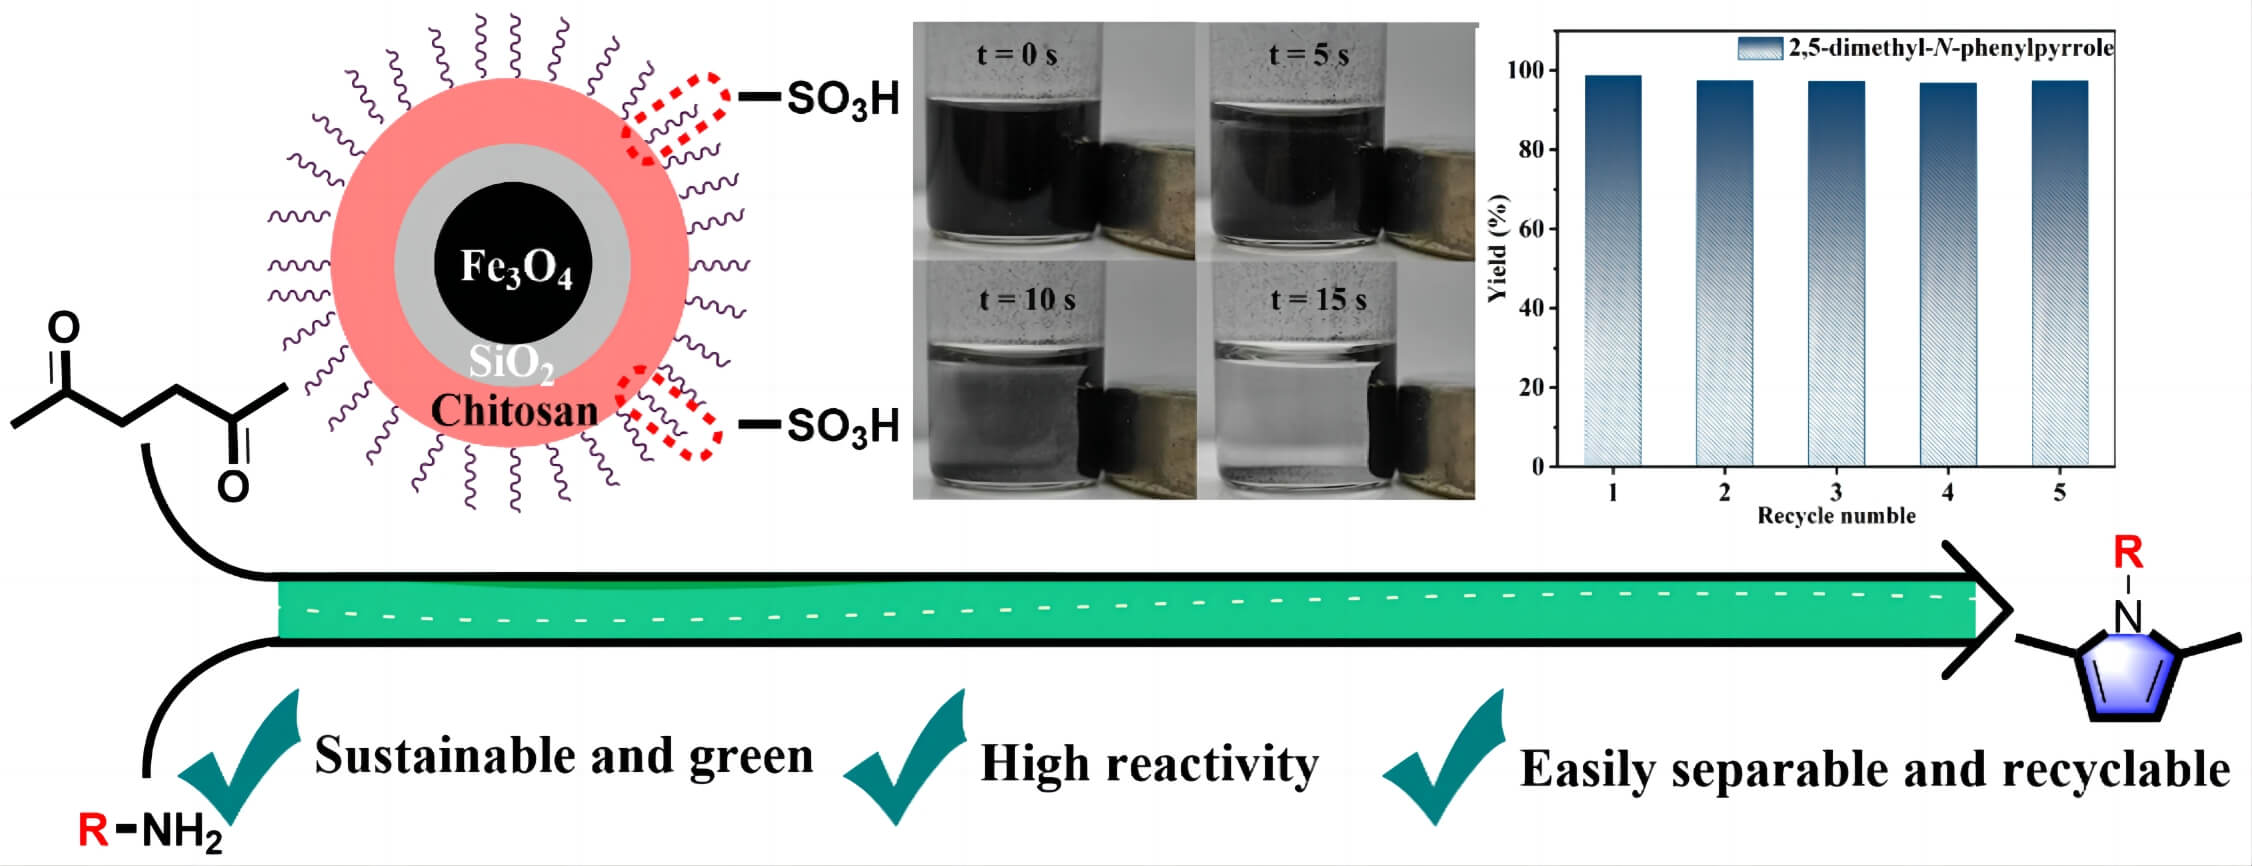 Acidic Magnetic Biocarbon-Enabled Upgrading of Biomass-Based Hexanedione into Pyrroles